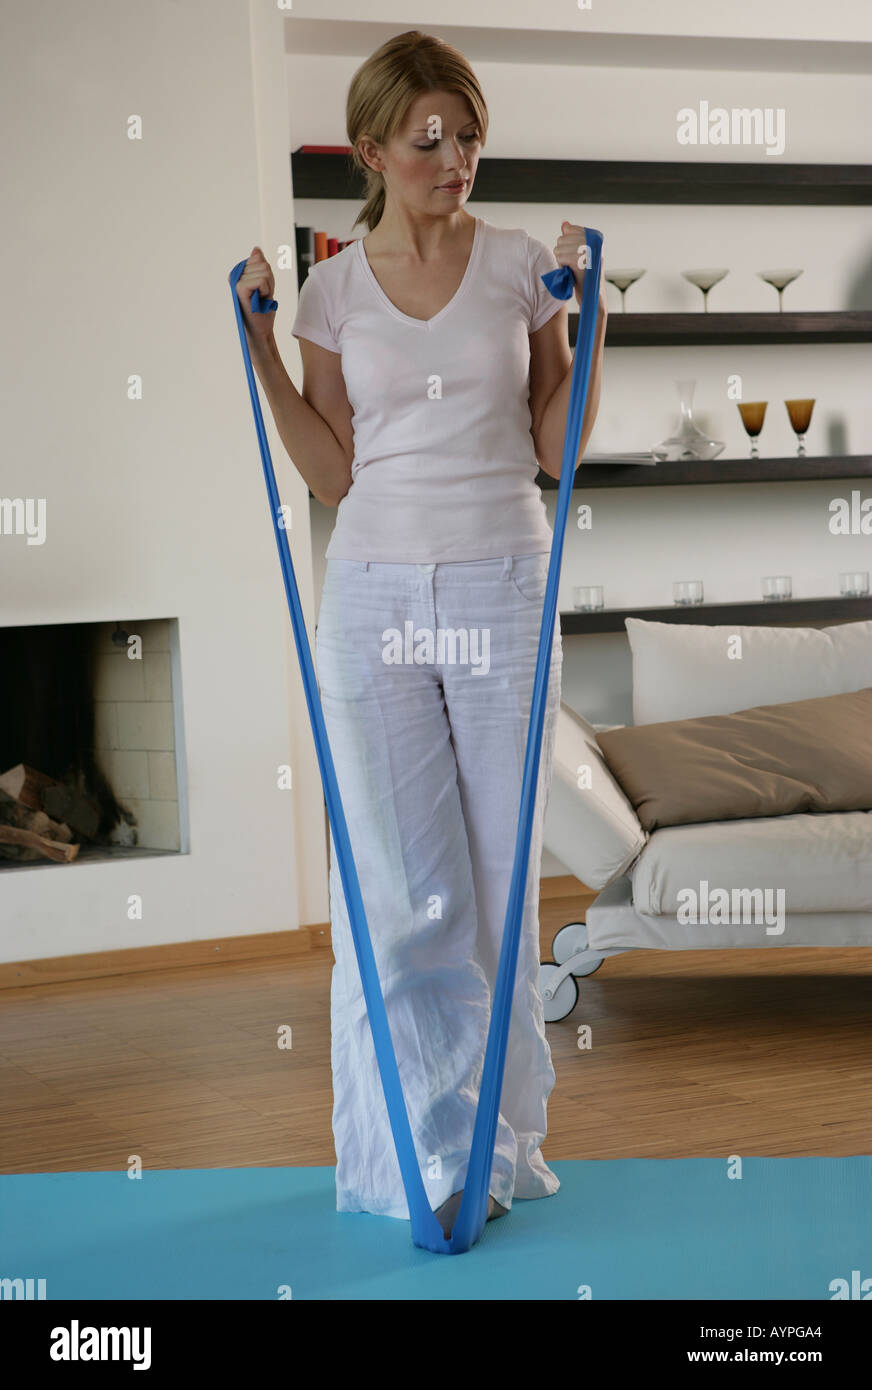 A blonde woman stretching a blue rubber band while exercising Stock Photo